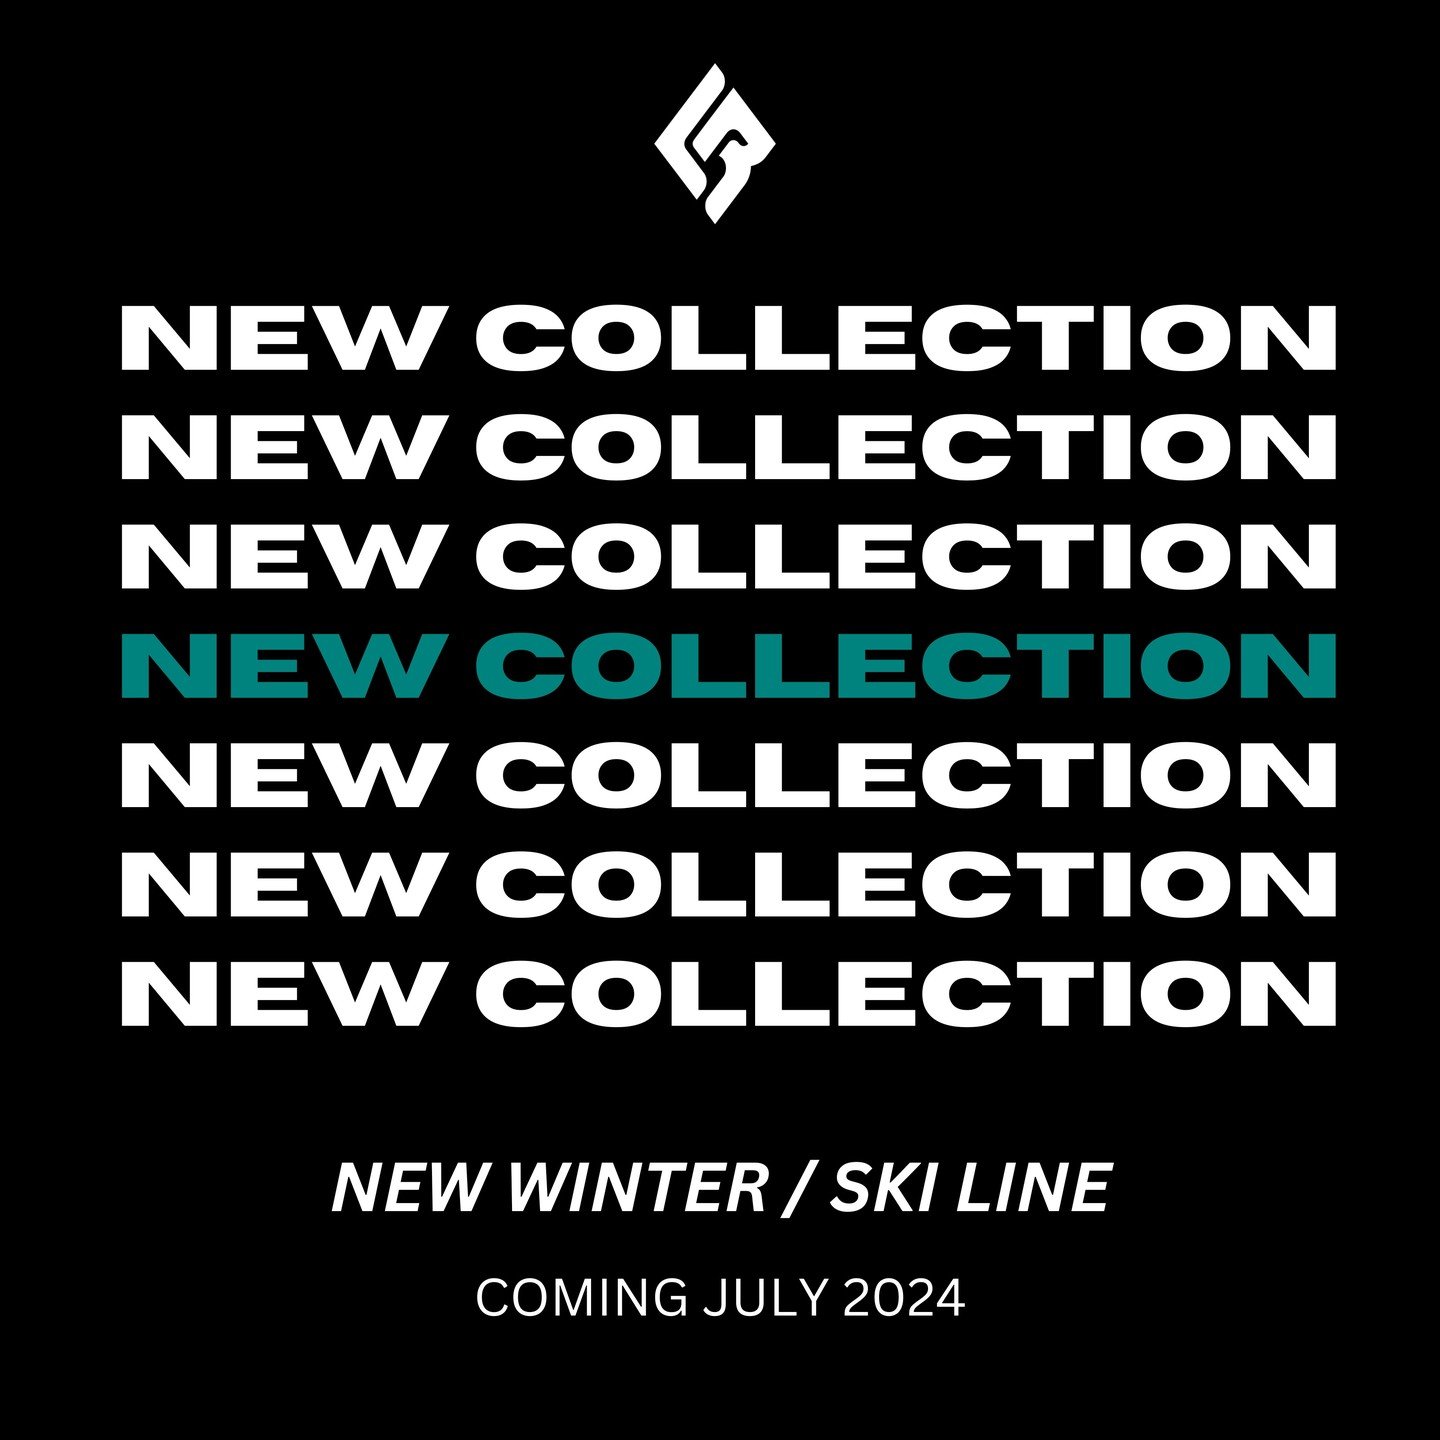 Swipe for an exclusive sneak peek of Lone Rock's upcoming Winter/Ski collection! Get ready to elevate your shelves with our eye-catching artwork, launching this summer in July 2024. It's time to start making room for these must-have designs! Don't fo